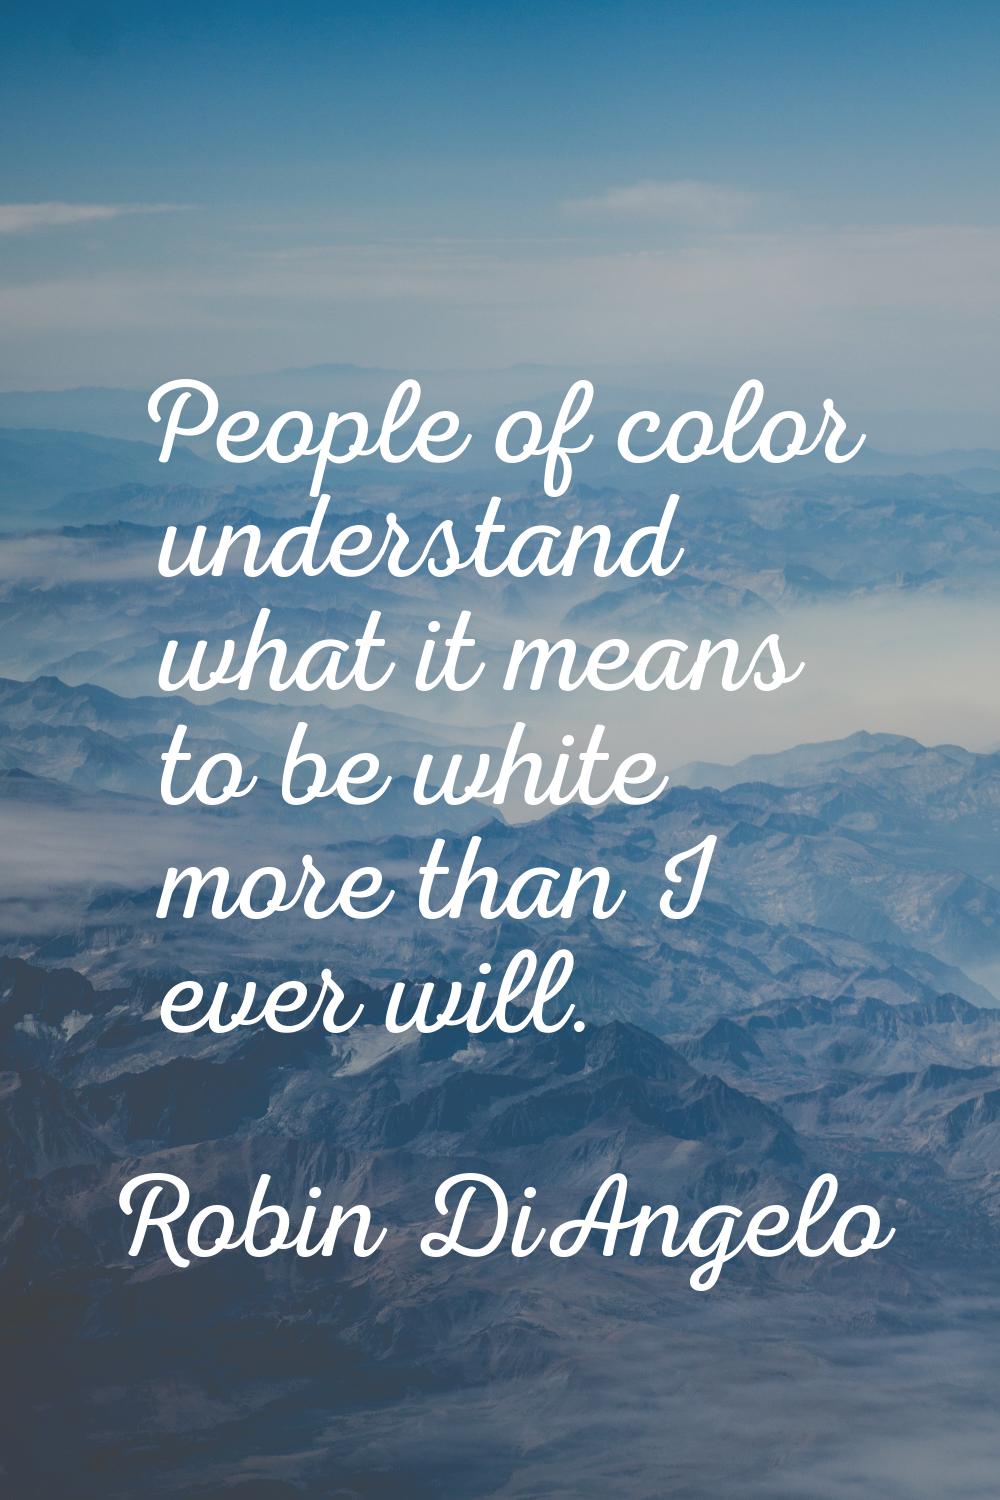 People of color understand what it means to be white more than I ever will.